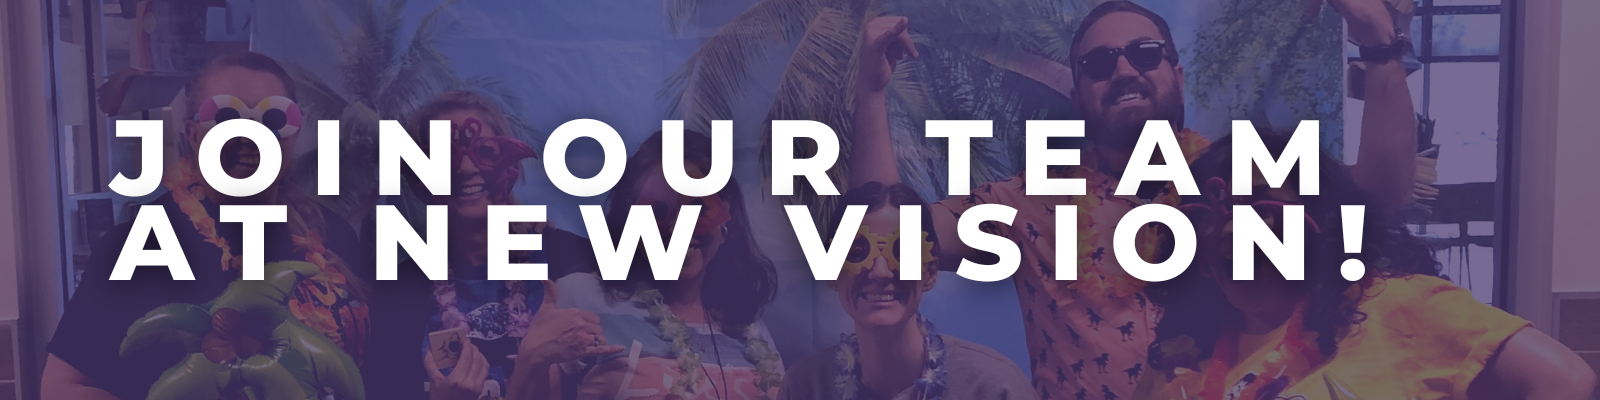 JOIN OUR TEAM AT NEW VISION!